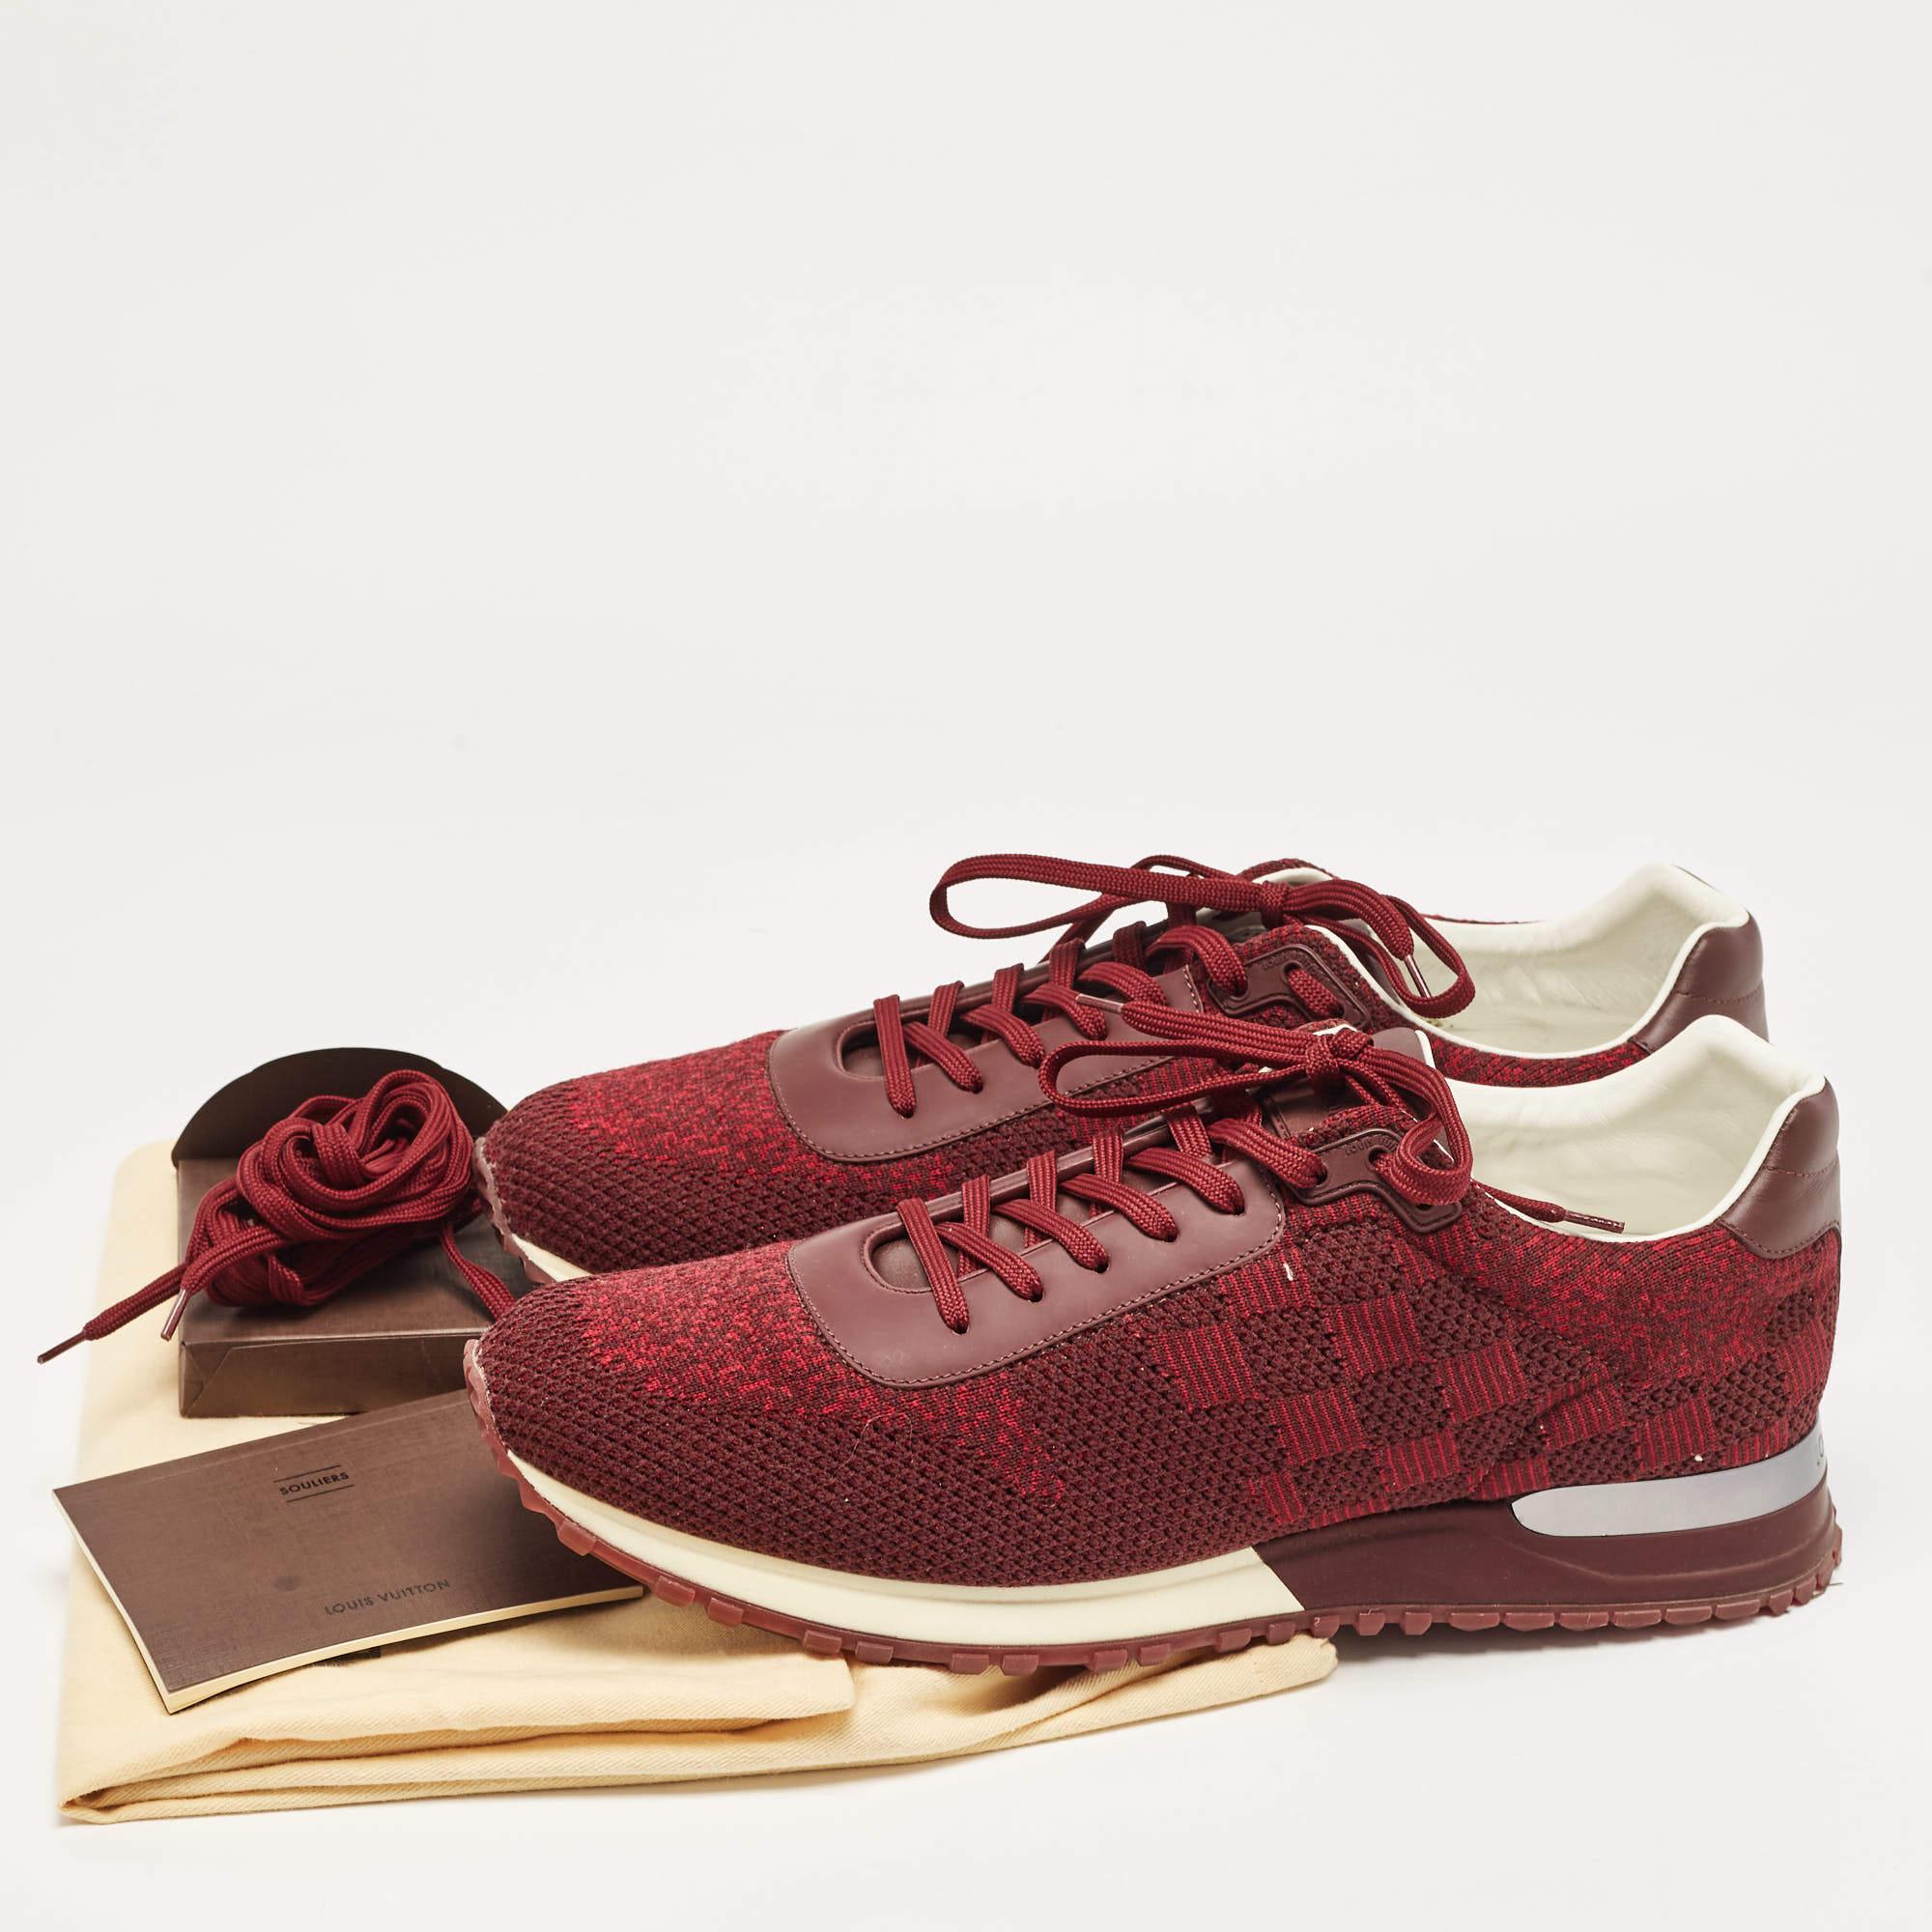 Louis Vuitton Burgundy Knit Fabric and Leather Run Away Sneakers Size 42.5 4